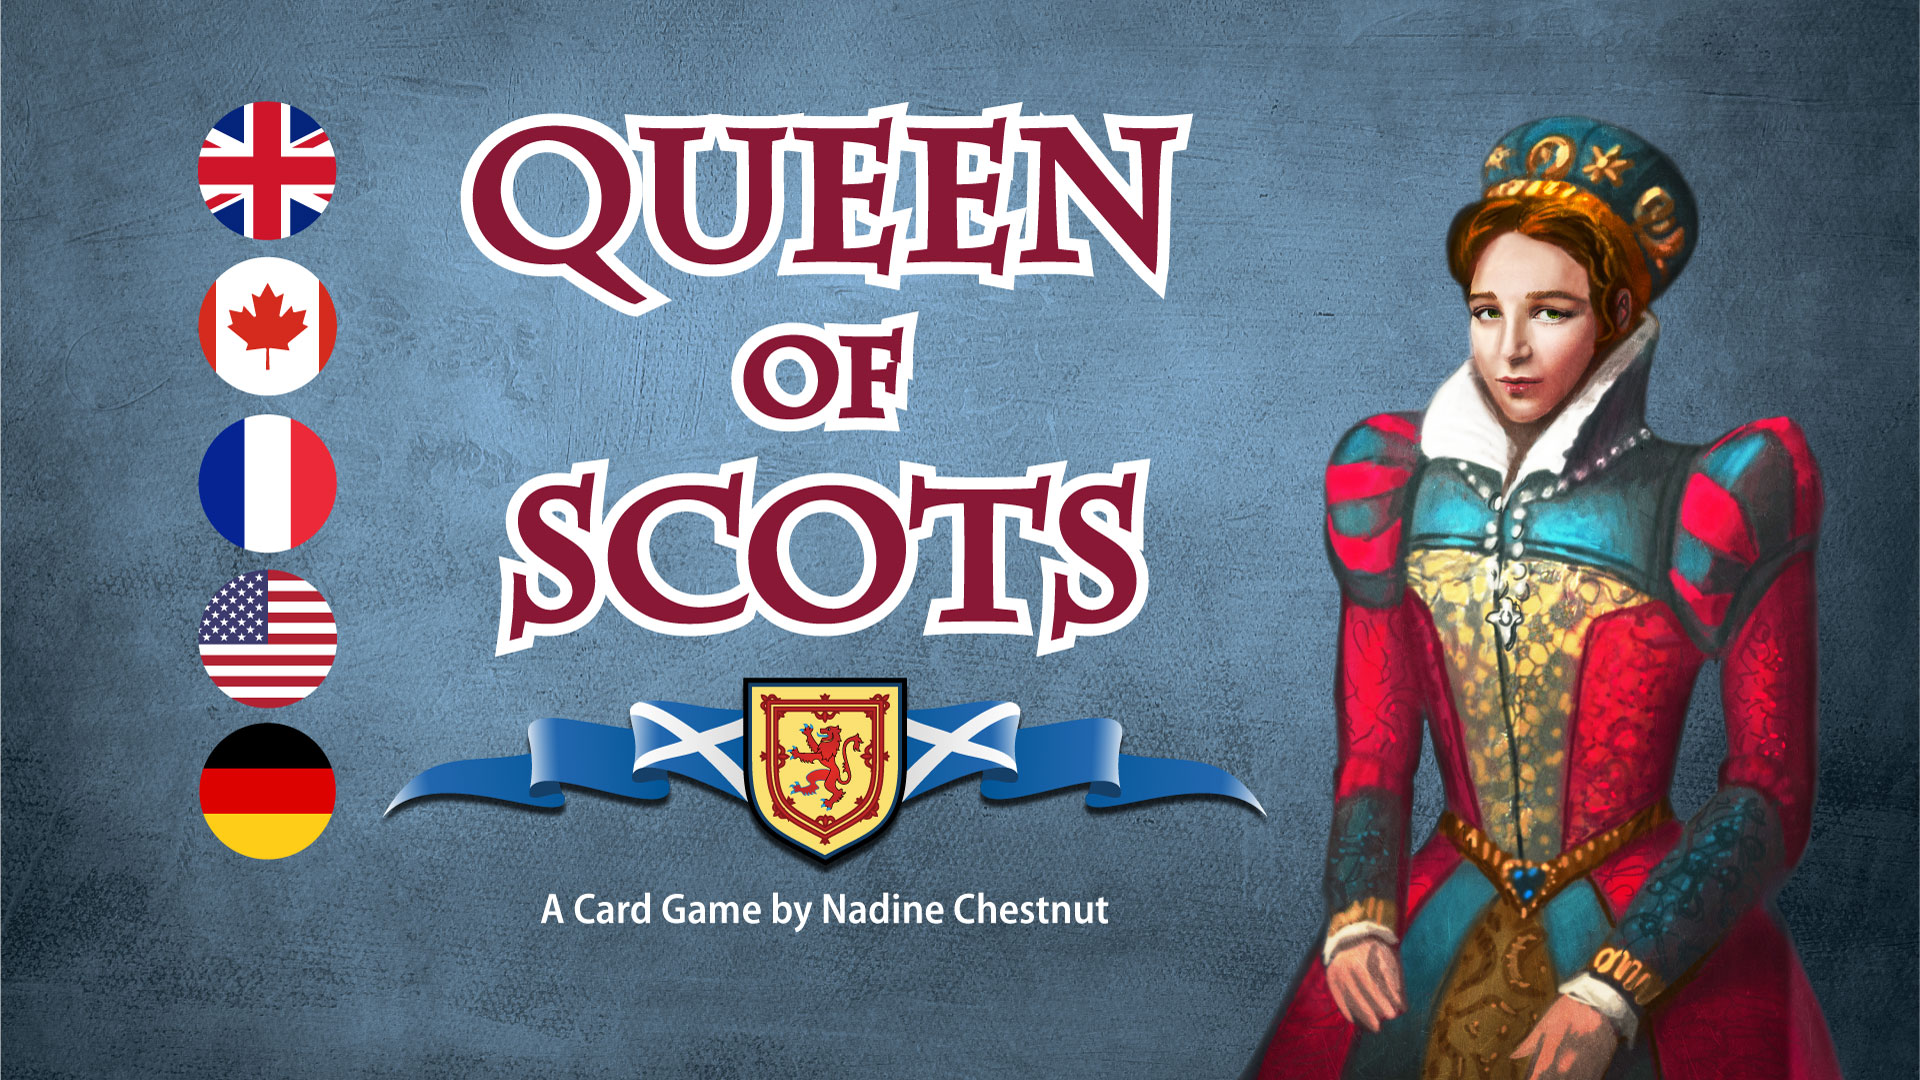 Tin Robot Games launches "Queenf Scots: The Card Game" on crowd-funding platform Kickstarter